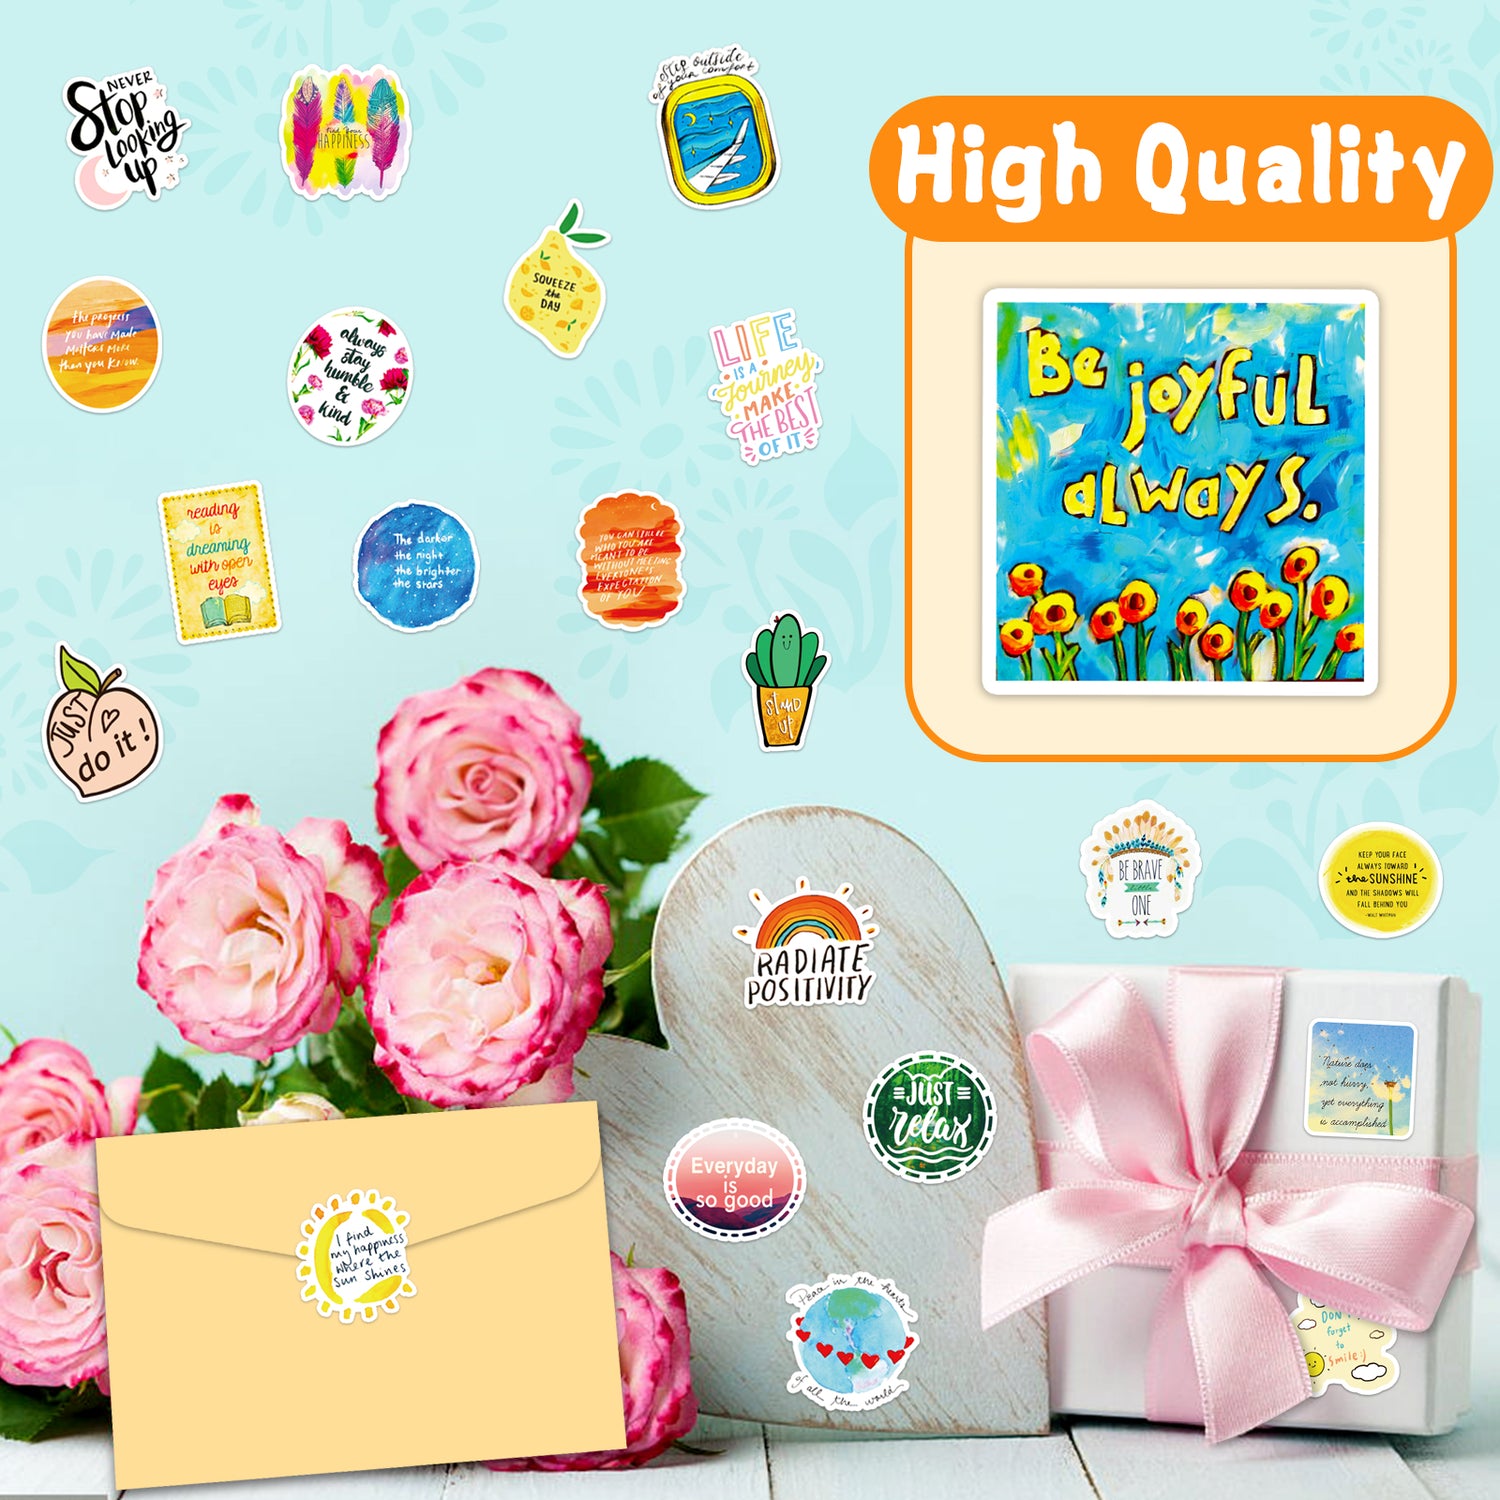 800PCS Positive Stickers for Thanksgiving Cards, Gift Box Packing